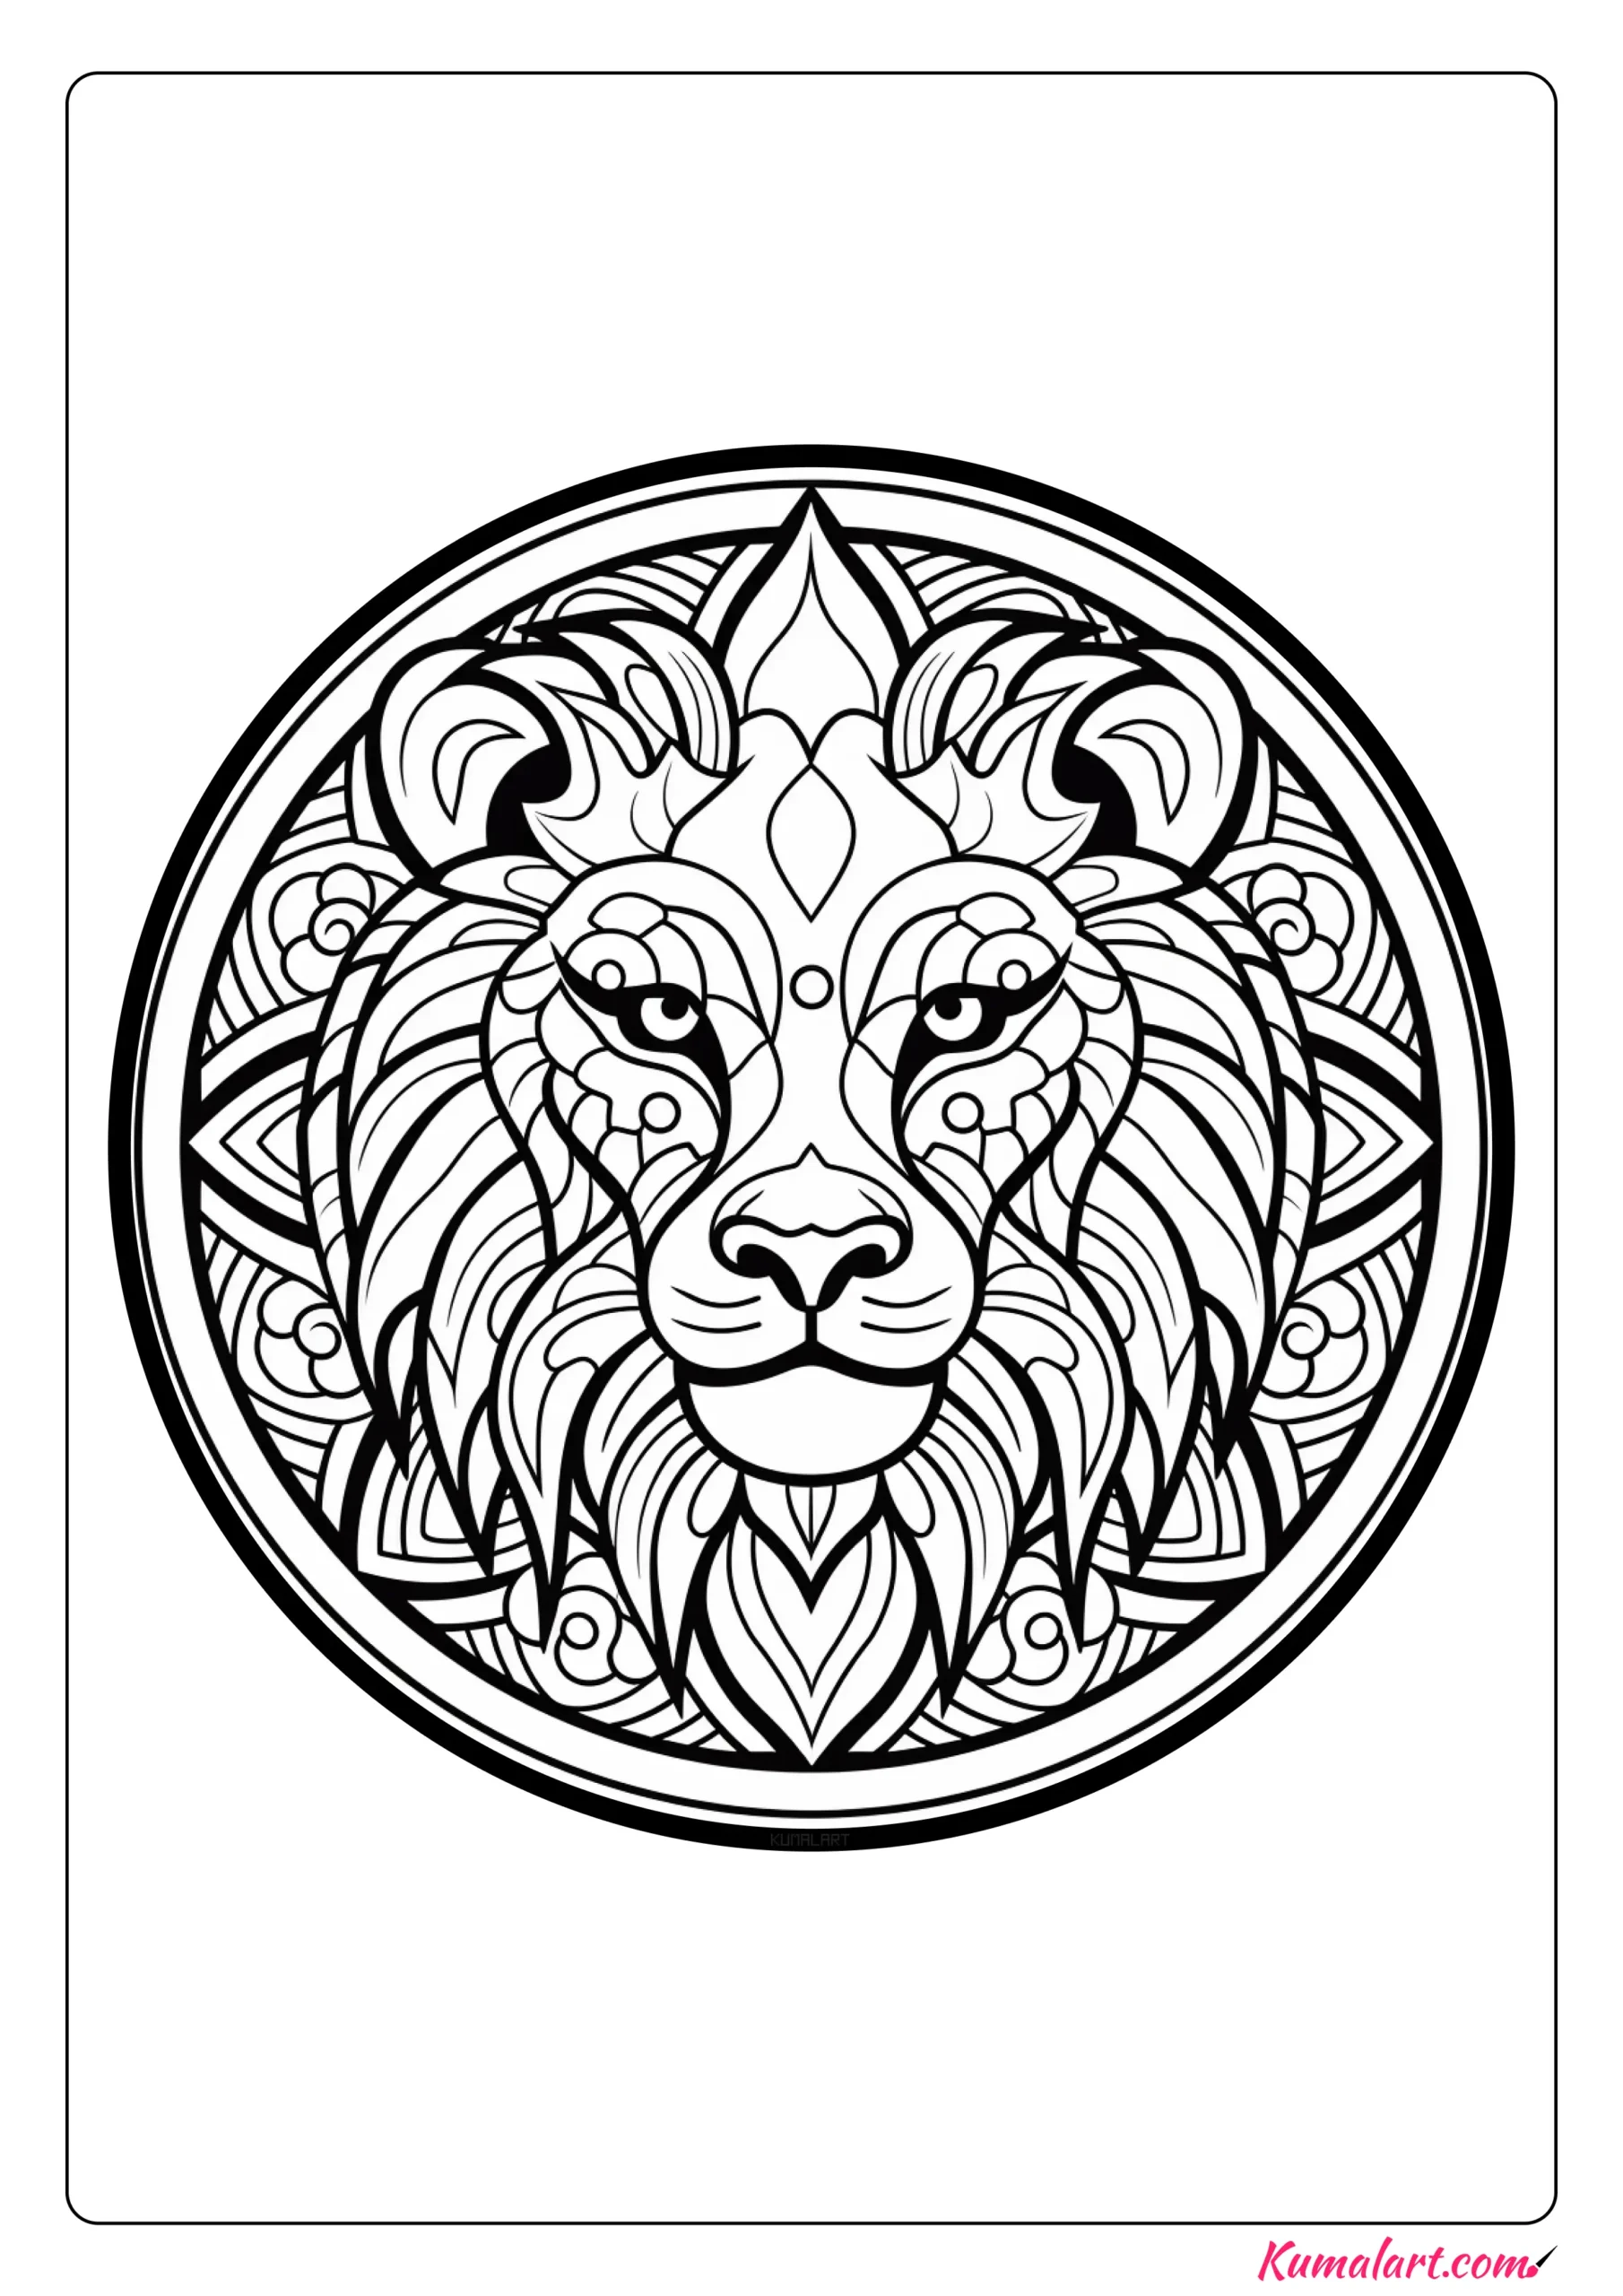 Beatrice the Lion Mandala Coloring Page